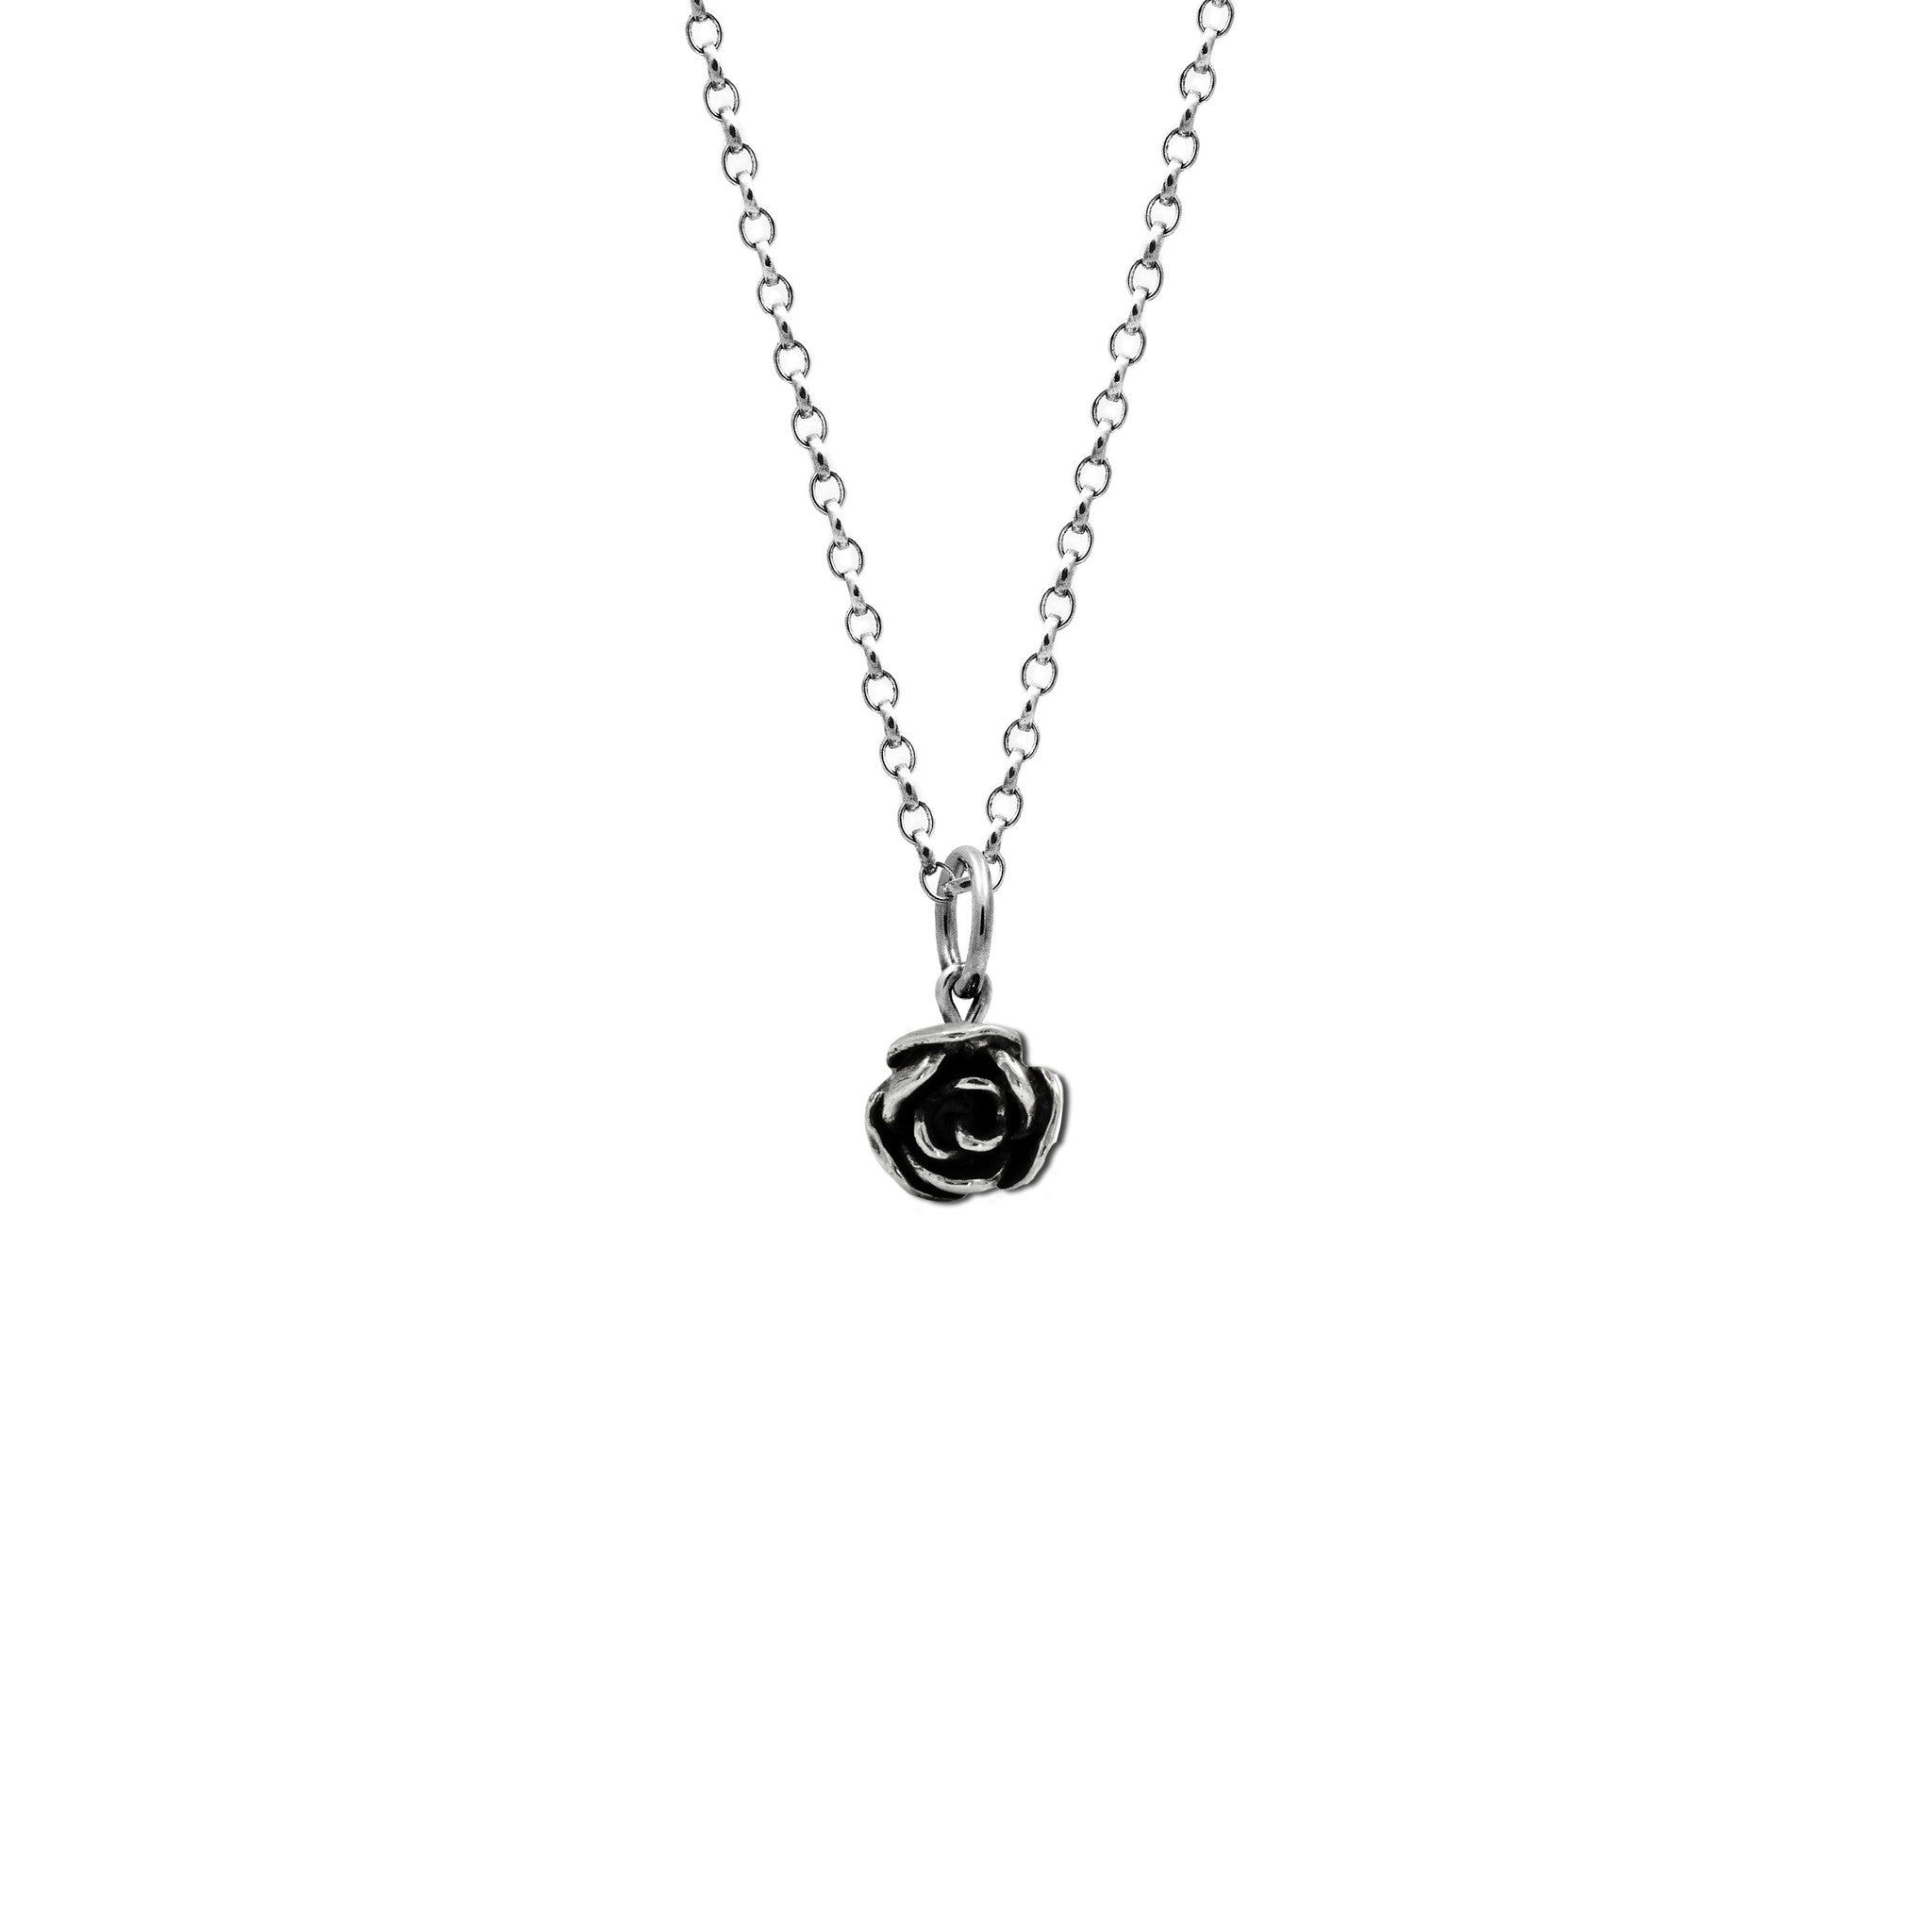 Silver rose charm pendant - small - ready to wear